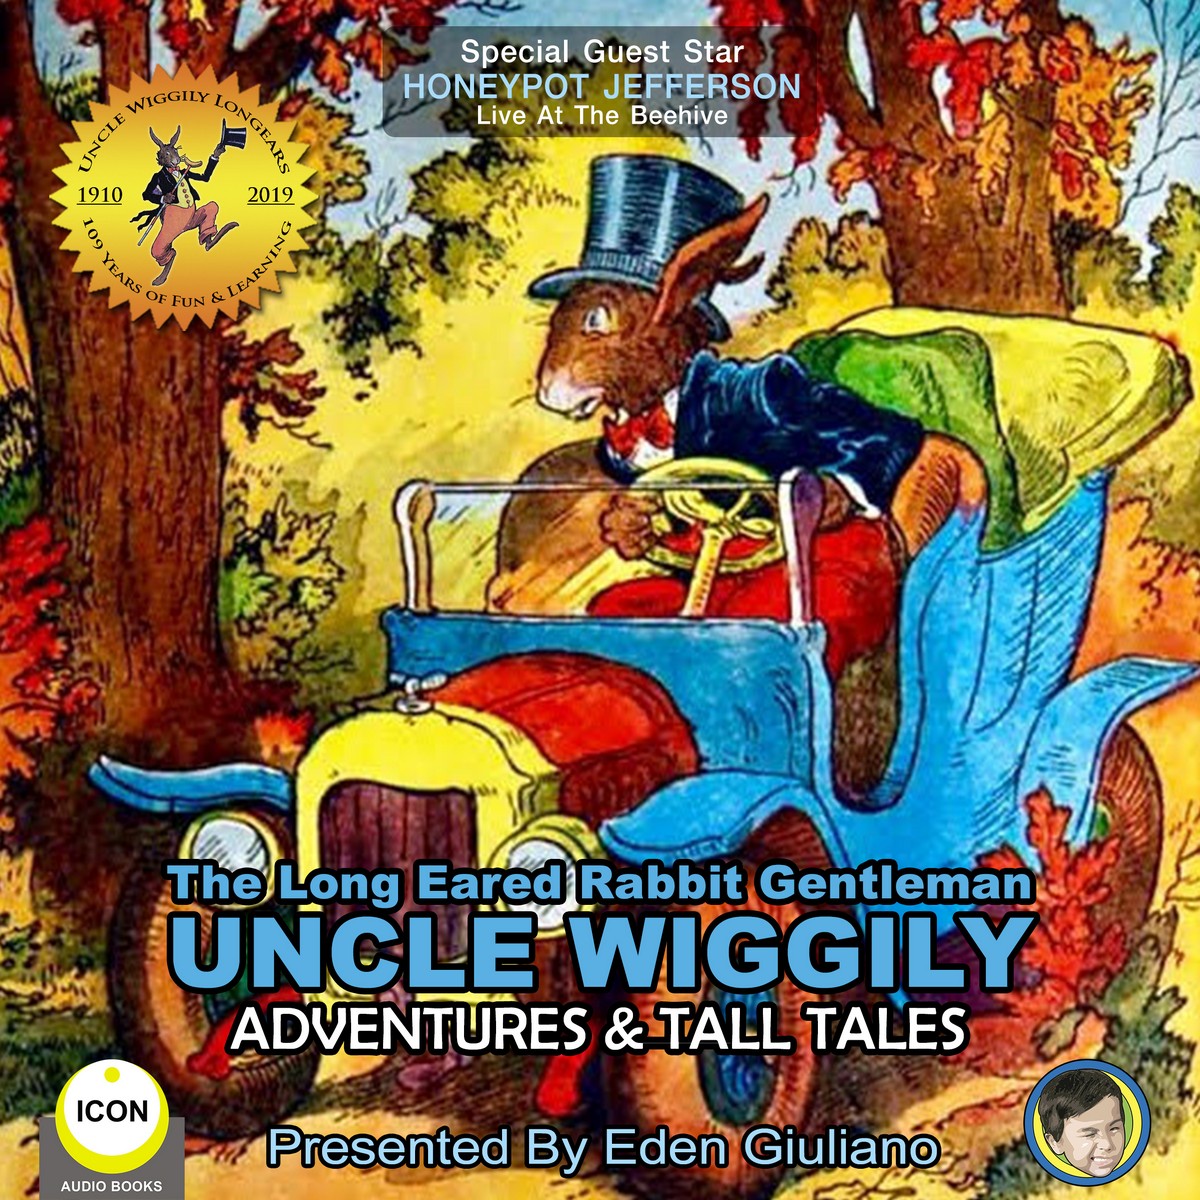 The Long Eared Rabbit Gentleman Uncle Wiggily – Adventures & Tall Tales